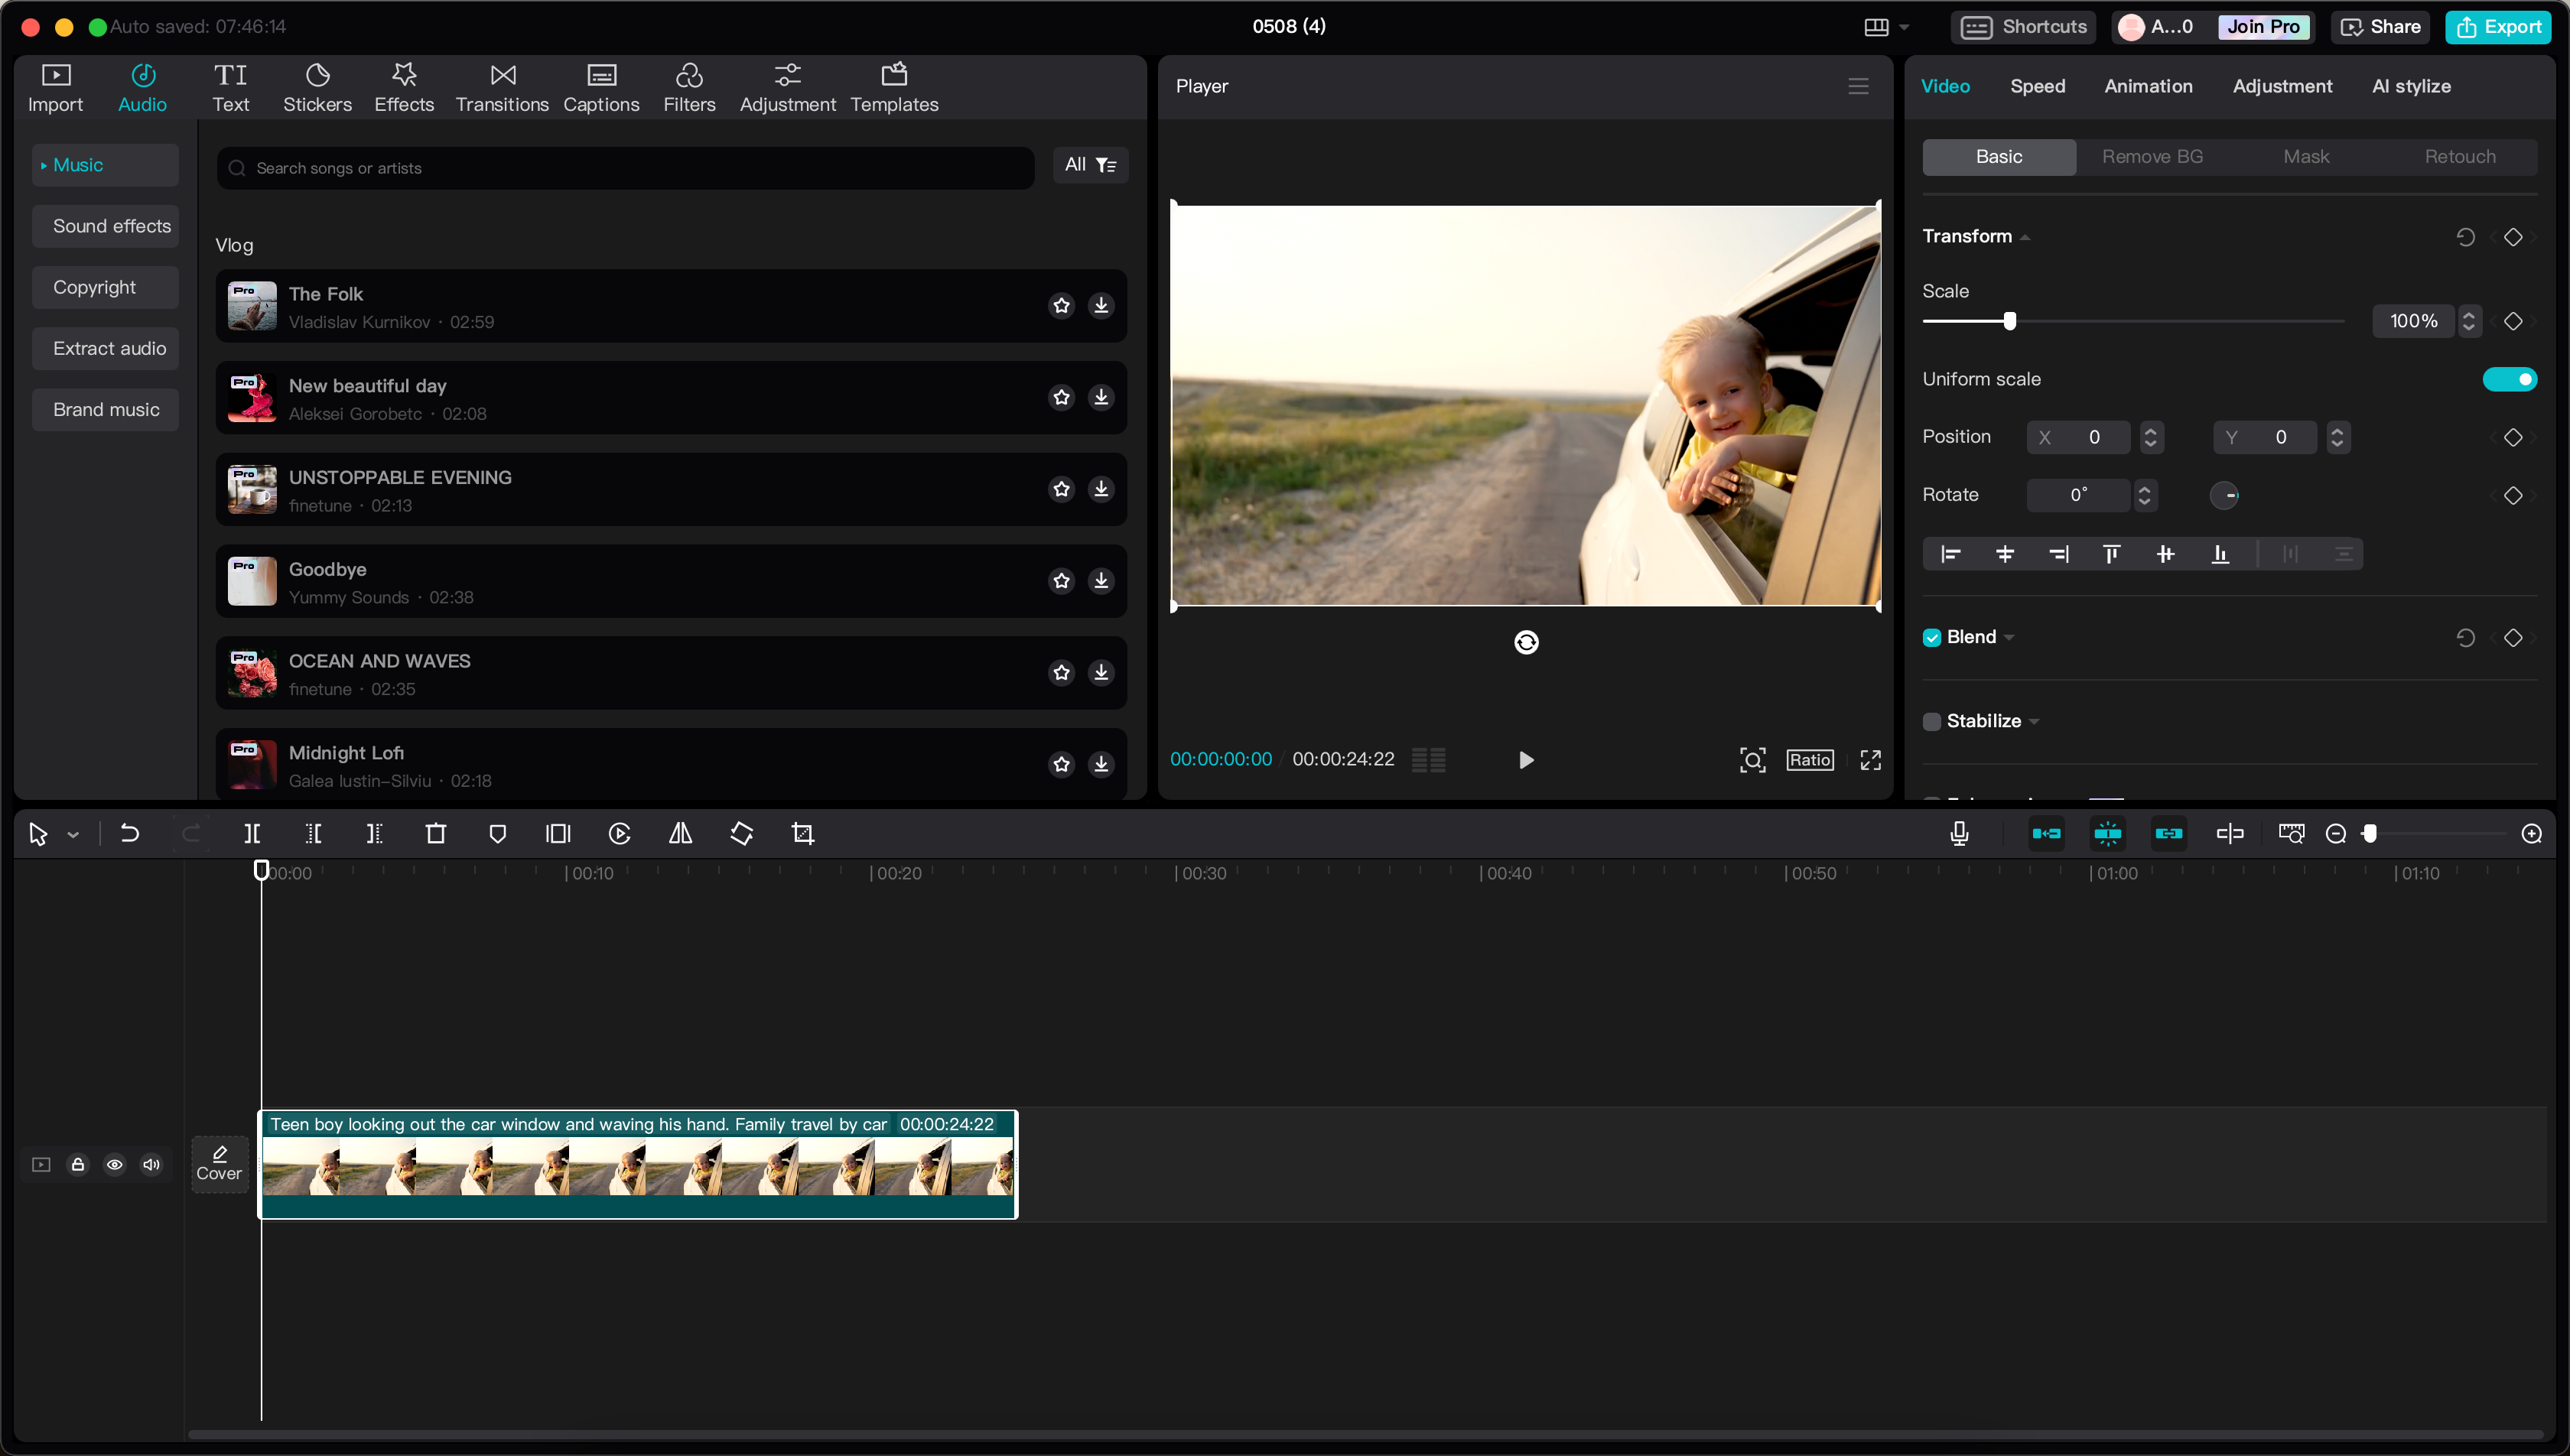 Notable video editing AI features of magic tool